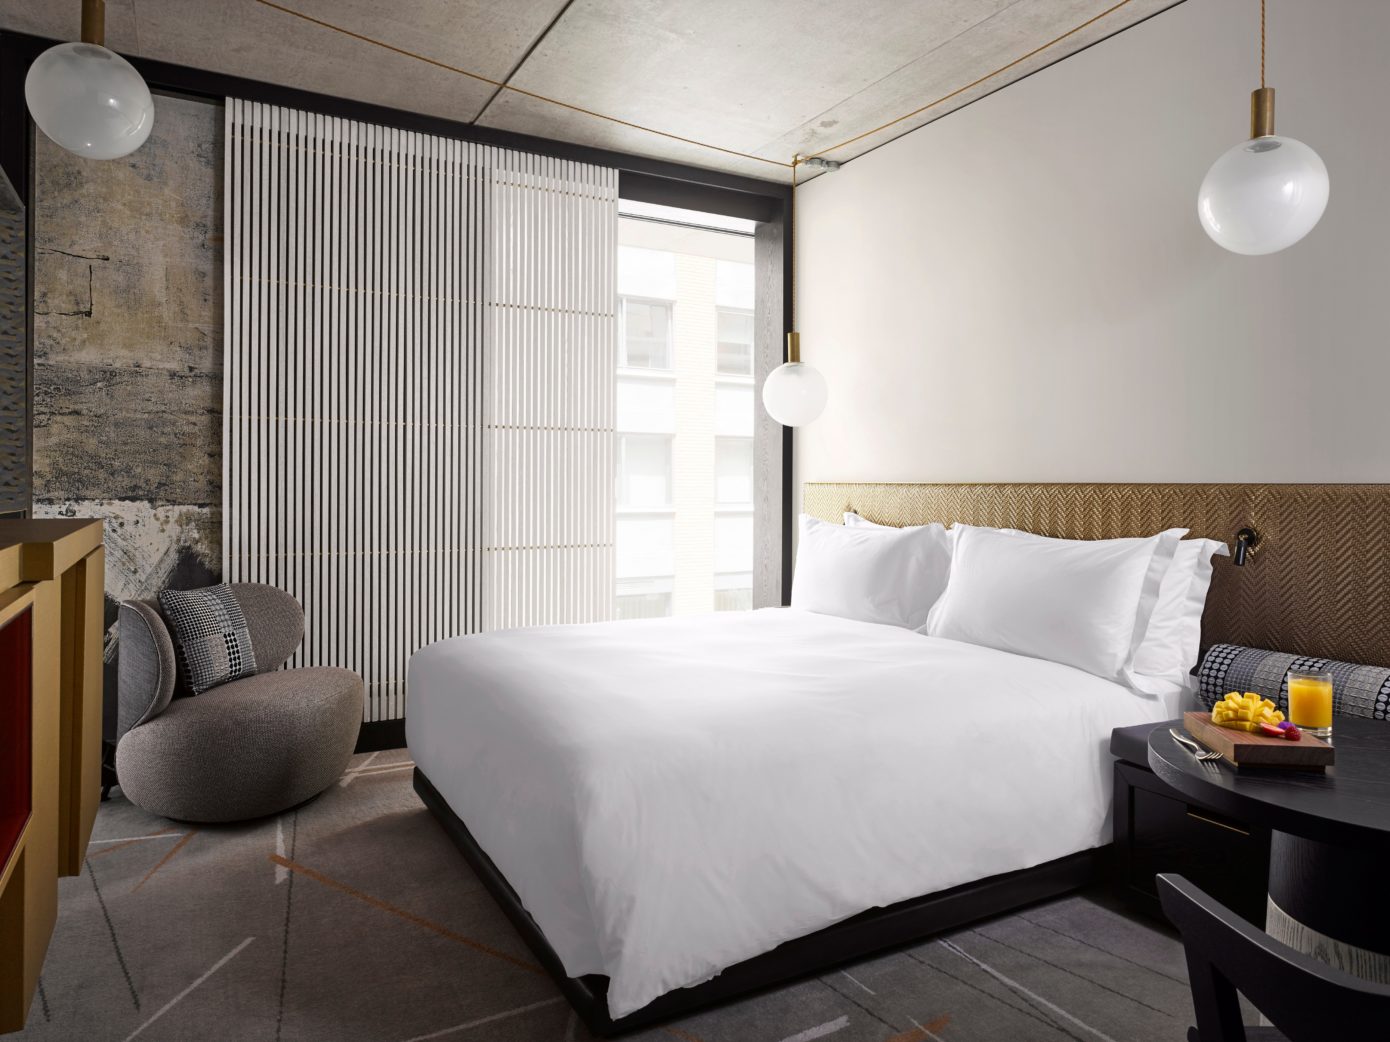 Nobu Hotel Shoreditch by Ben Adams Architects and Studio Mica and Studio